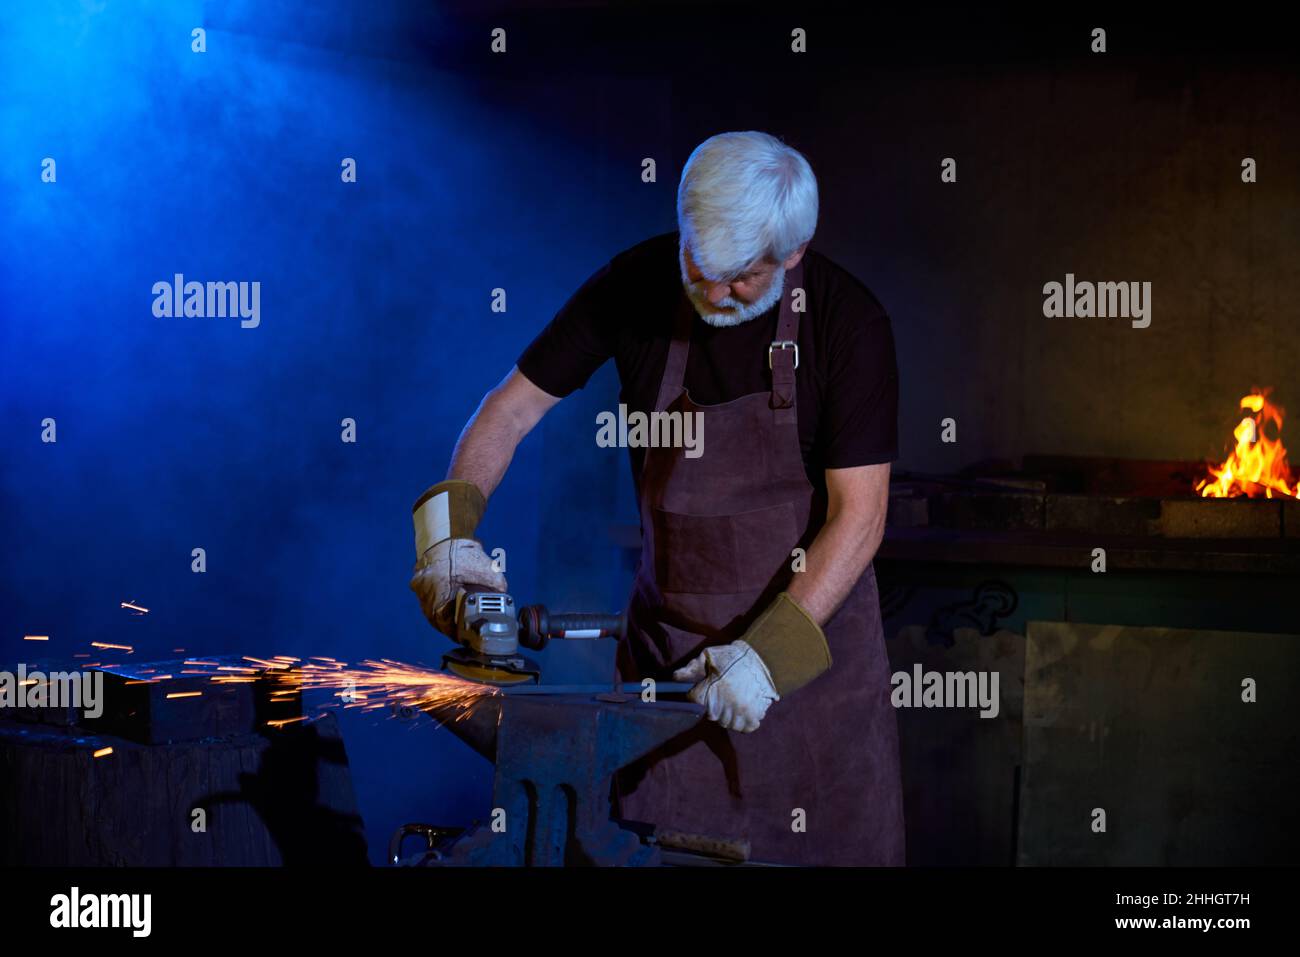 Caucasian grey haired craftsman welding metal on anvil. Mature man wearing protective apron and gloves. Manual and hard work at forge.  Stock Photo